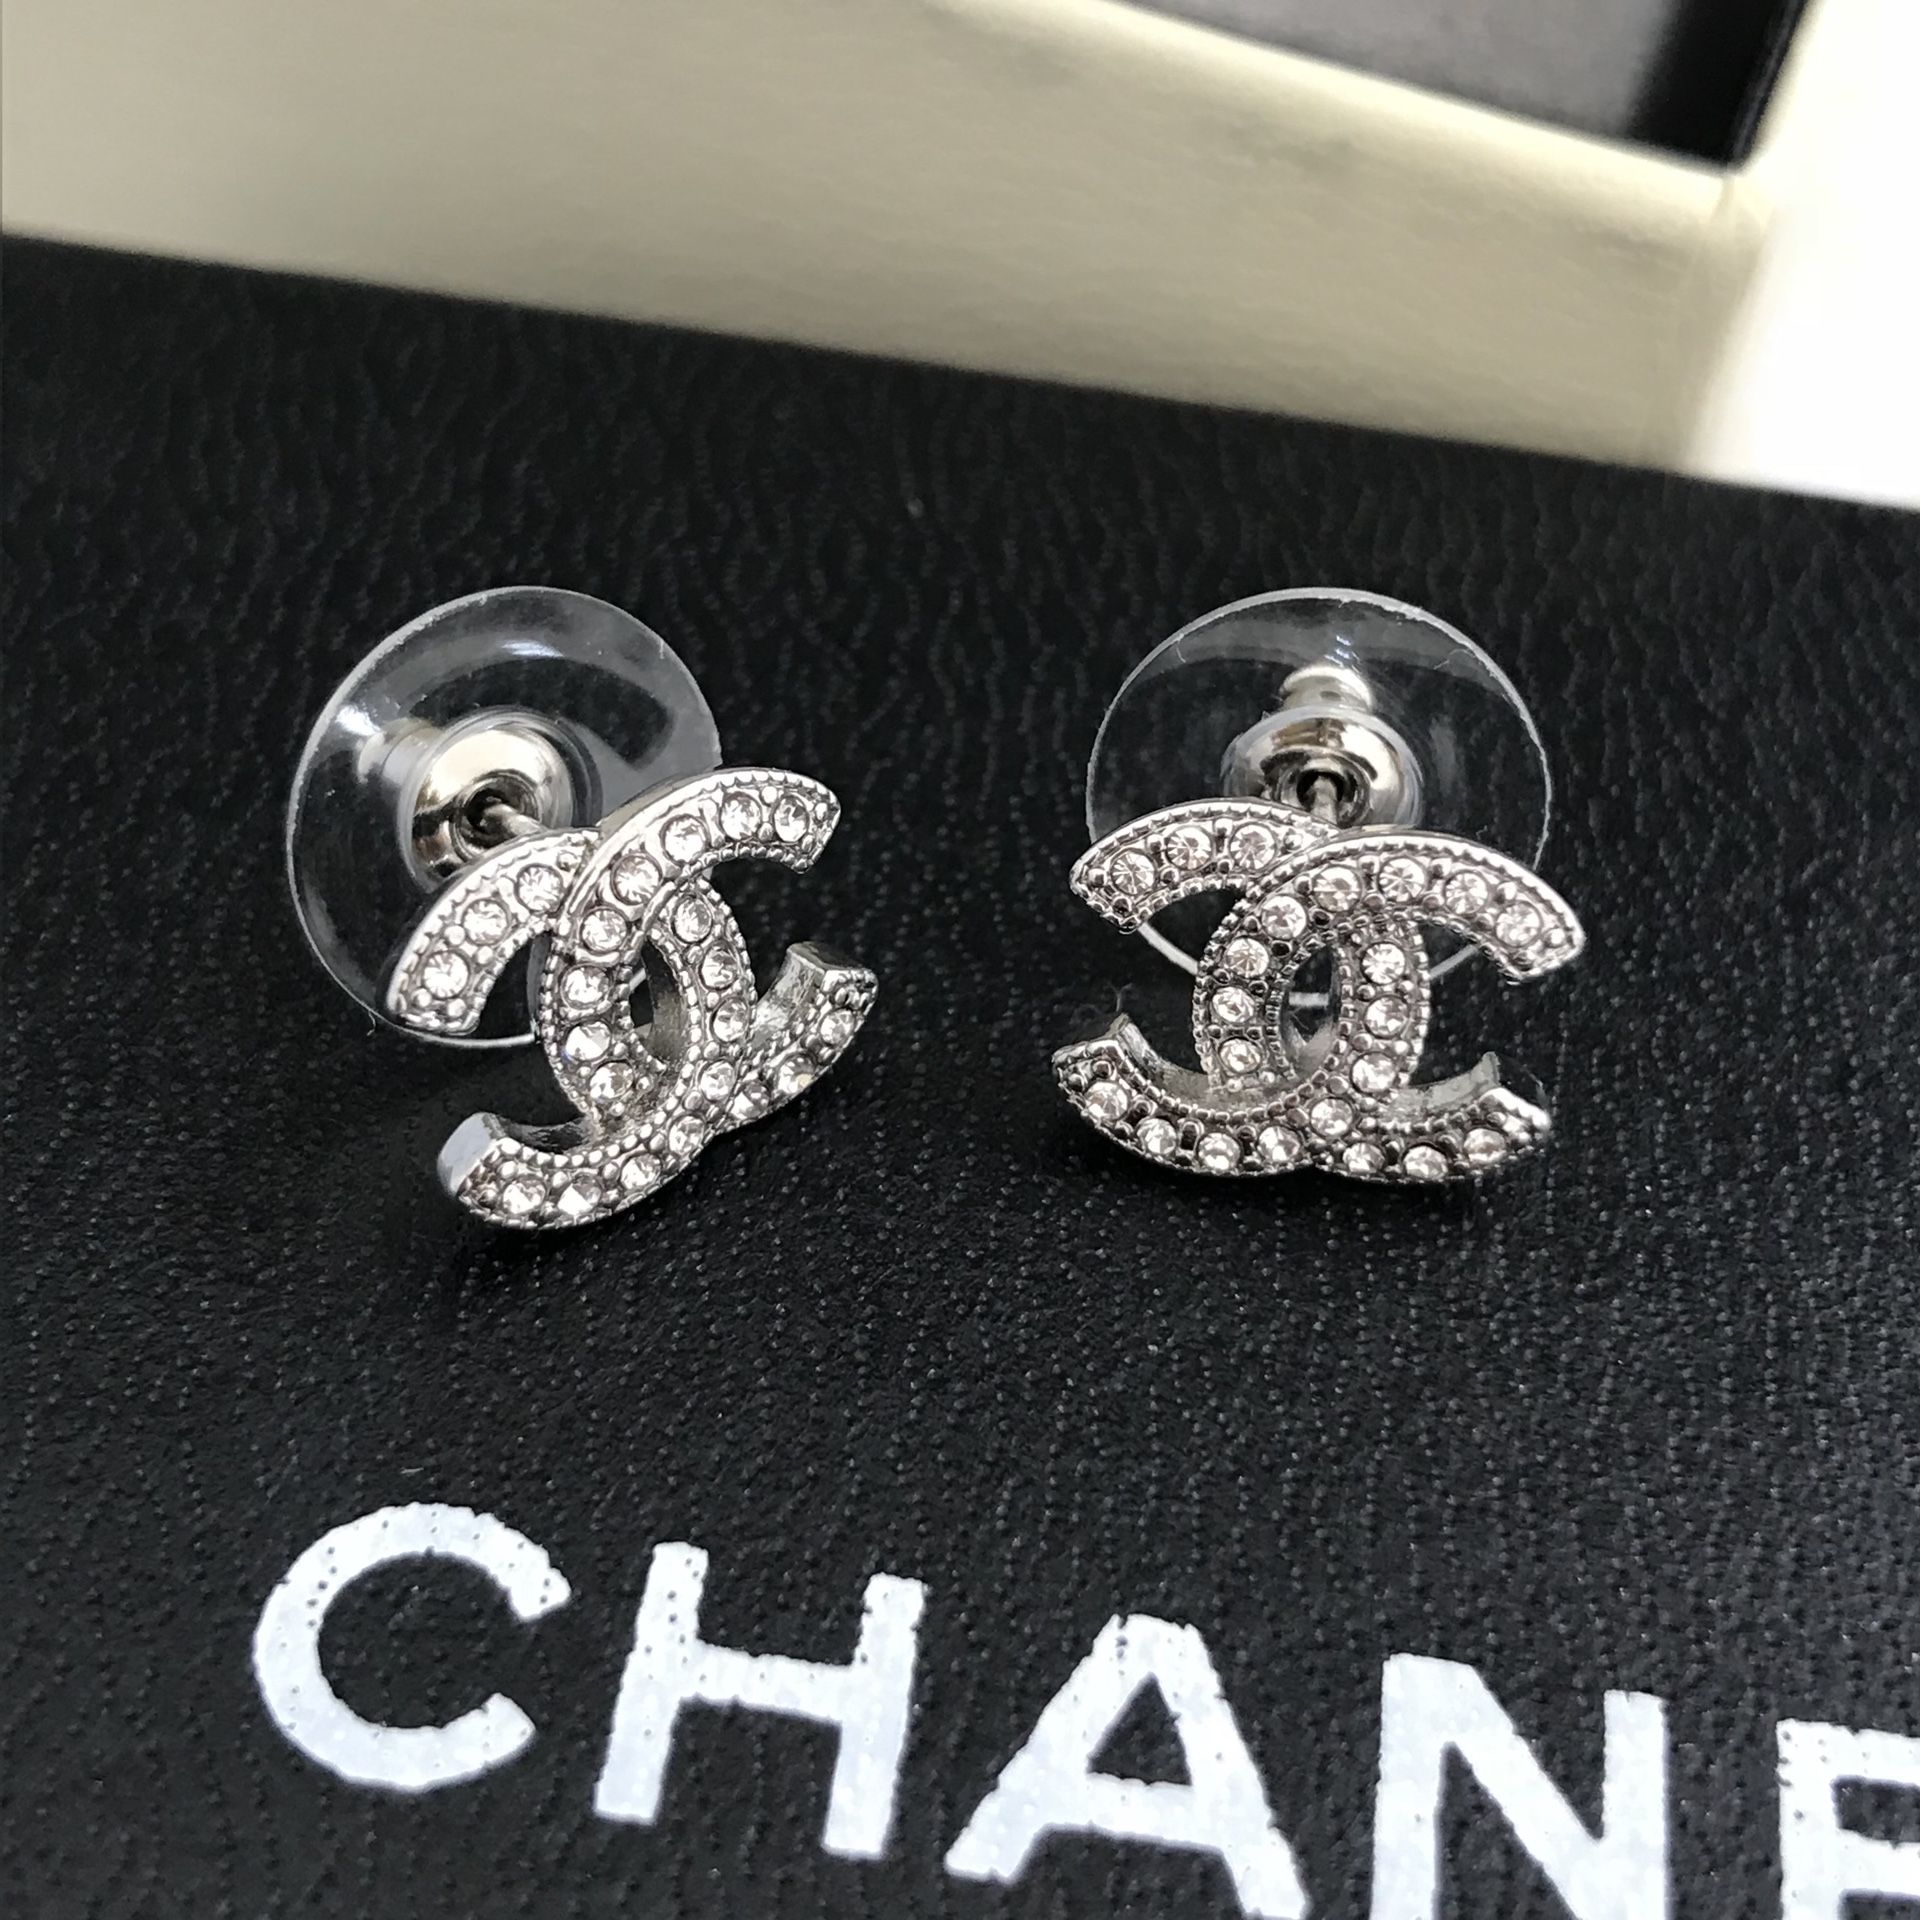 Chanel - Authenticated Coco Crush Earrings - Metal Gold for Women, Never Worn